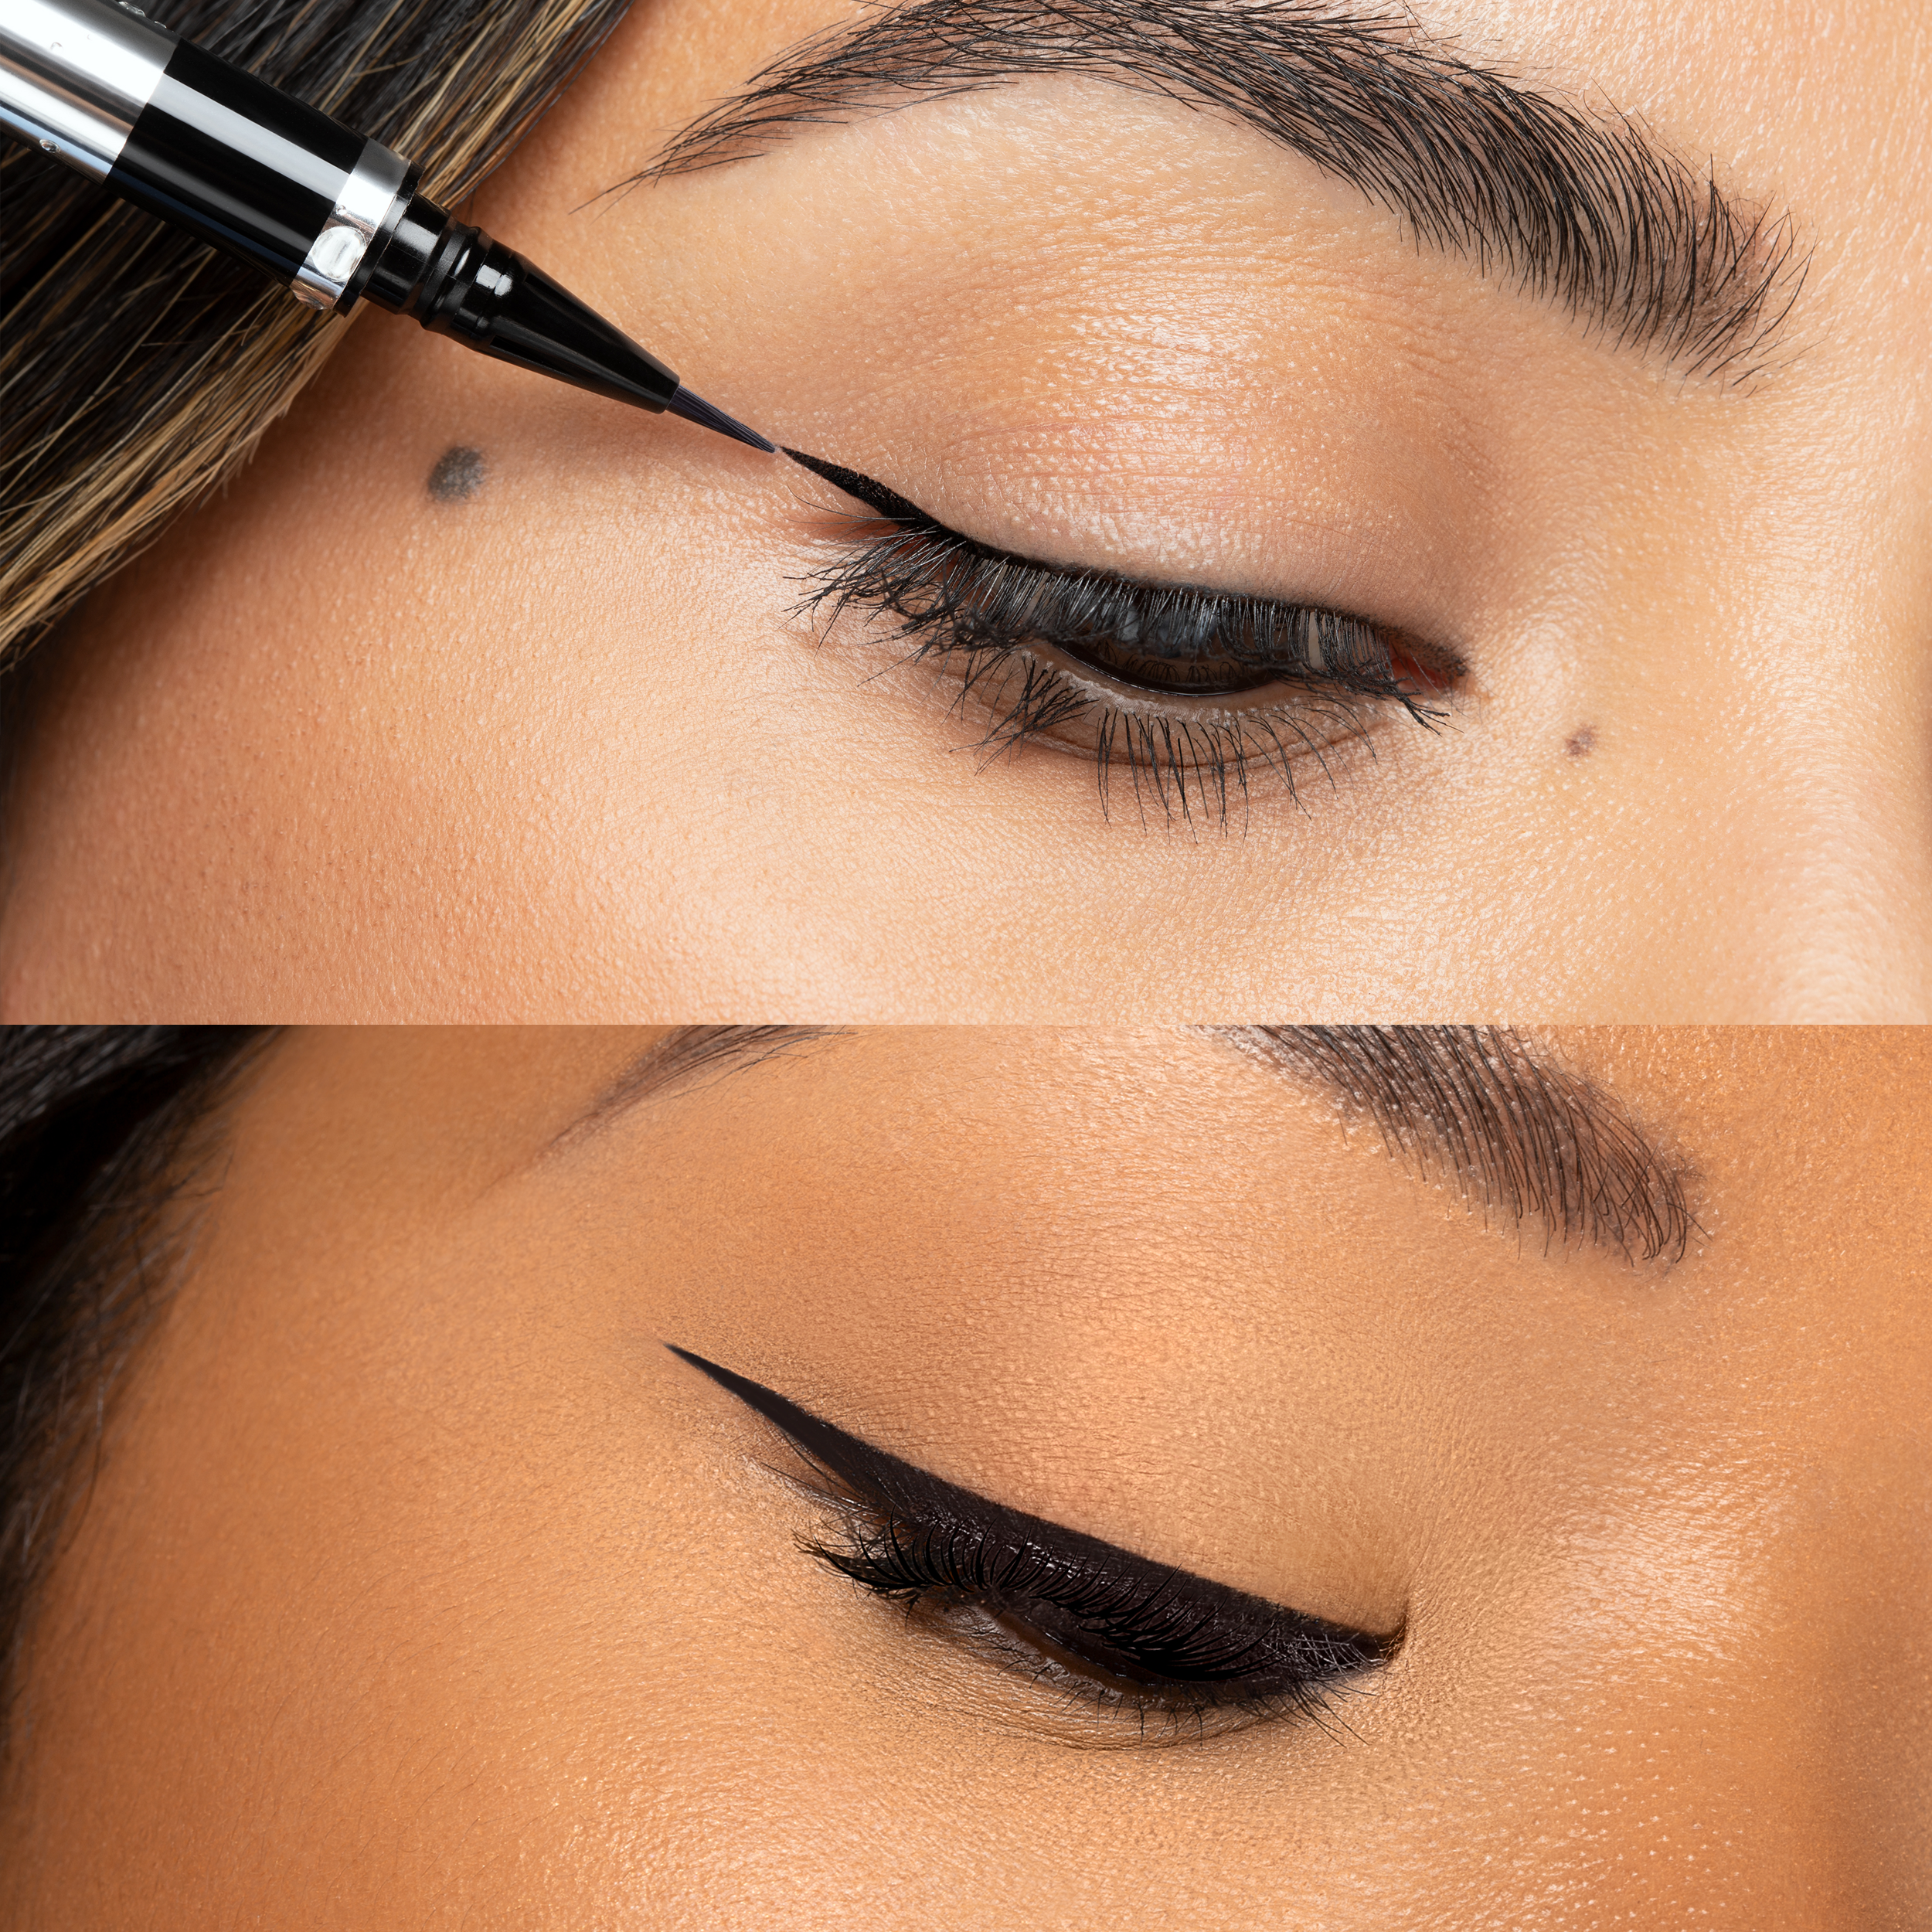 Our Ultra Black Mascara Liner adds volume and thickness without